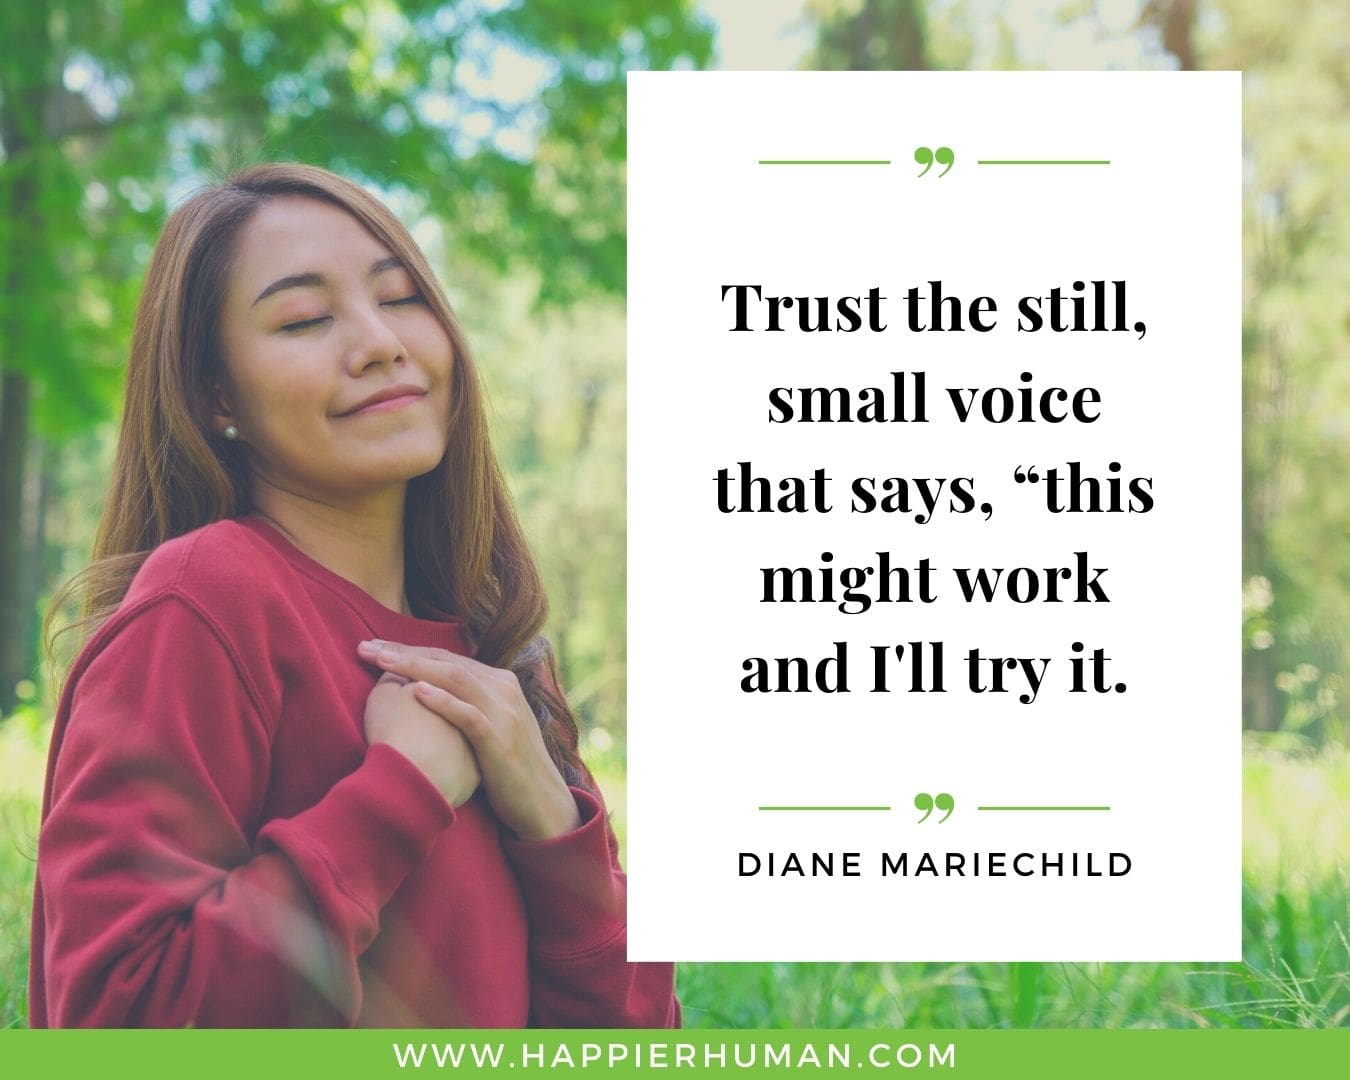 Overthinking Quotes - “Trust the still, small voice that says, “this might work and I'll try it.” - Diane Mariechild